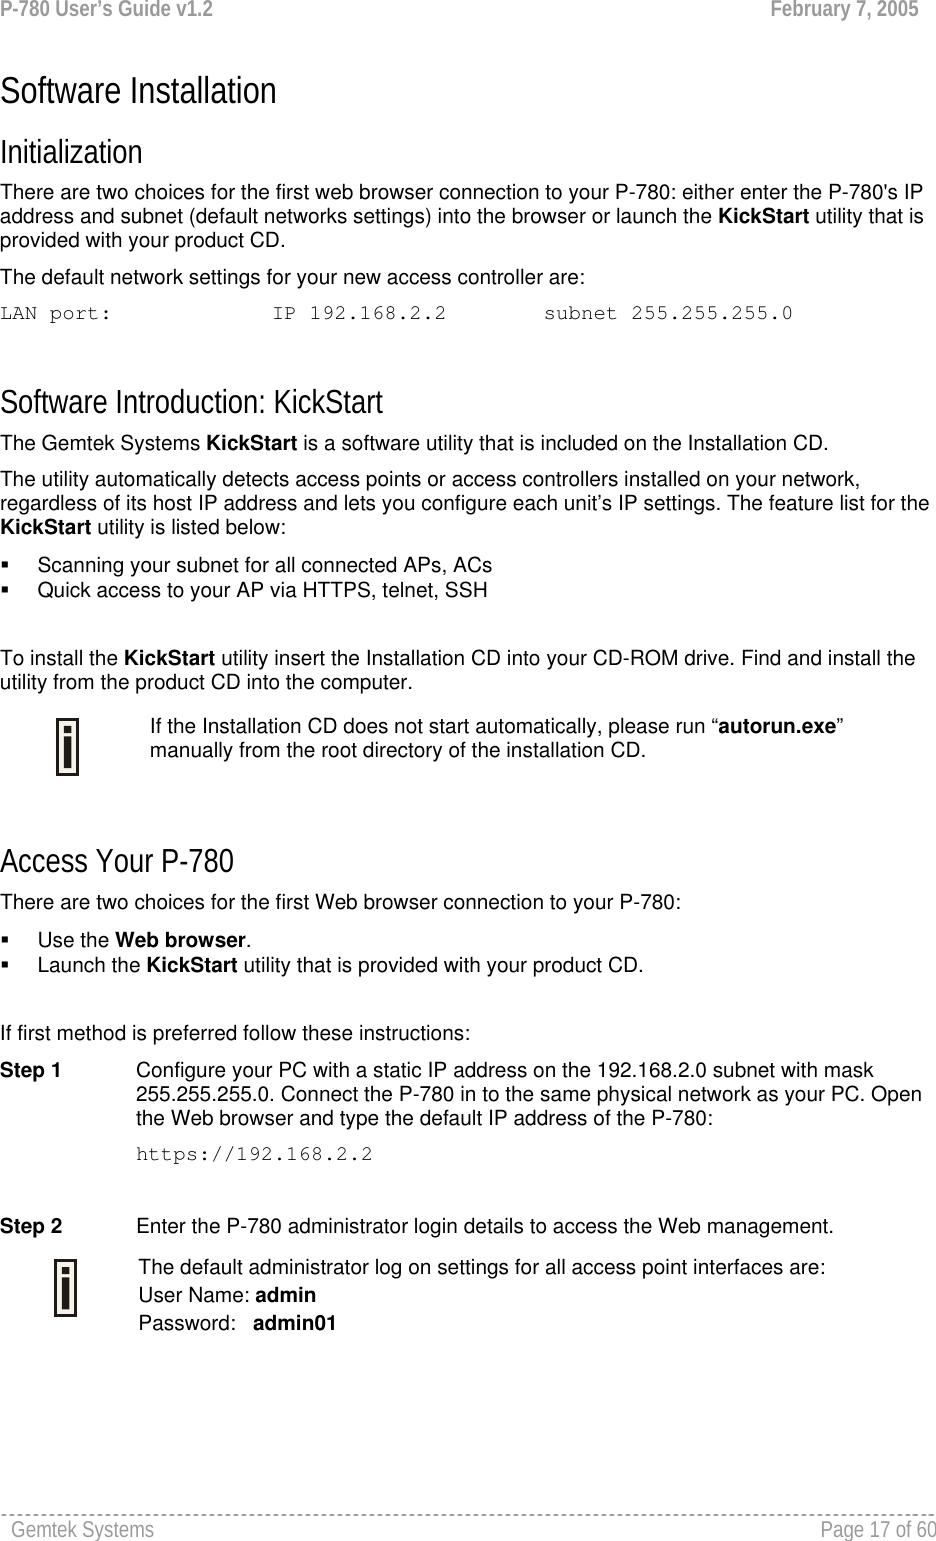 P-780 User’s Guide v1.2  February 7, 2005 Gemtek Systems    Page 17 of 60   Software Installation Initialization  There are two choices for the first web browser connection to your P-780: either enter the P-780&apos;s IP address and subnet (default networks settings) into the browser or launch the KickStart utility that is provided with your product CD.  The default network settings for your new access controller are: LAN port:    IP 192.168.2.2  subnet 255.255.255.0  Software Introduction: KickStart The Gemtek Systems KickStart is a software utility that is included on the Installation CD.  The utility automatically detects access points or access controllers installed on your network, regardless of its host IP address and lets you configure each unit’s IP settings. The feature list for the KickStart utility is listed below:   Scanning your subnet for all connected APs, ACs   Quick access to your AP via HTTPS, telnet, SSH  To install the KickStart utility insert the Installation CD into your CD-ROM drive. Find and install the utility from the product CD into the computer.  Access Your P-780 There are two choices for the first Web browser connection to your P-780:   Use the Web browser.  Launch the KickStart utility that is provided with your product CD.   If first method is preferred follow these instructions: Step 1  Configure your PC with a static IP address on the 192.168.2.0 subnet with mask 255.255.255.0. Connect the P-780 in to the same physical network as your PC. Open the Web browser and type the default IP address of the P-780: https://192.168.2.2  Step 2  Enter the P-780 administrator login details to access the Web management.  The default administrator log on settings for all access point interfaces are: User Name: admin Password:   admin01    If the Installation CD does not start automatically, please run “autorun.exe” manually from the root directory of the installation CD. 